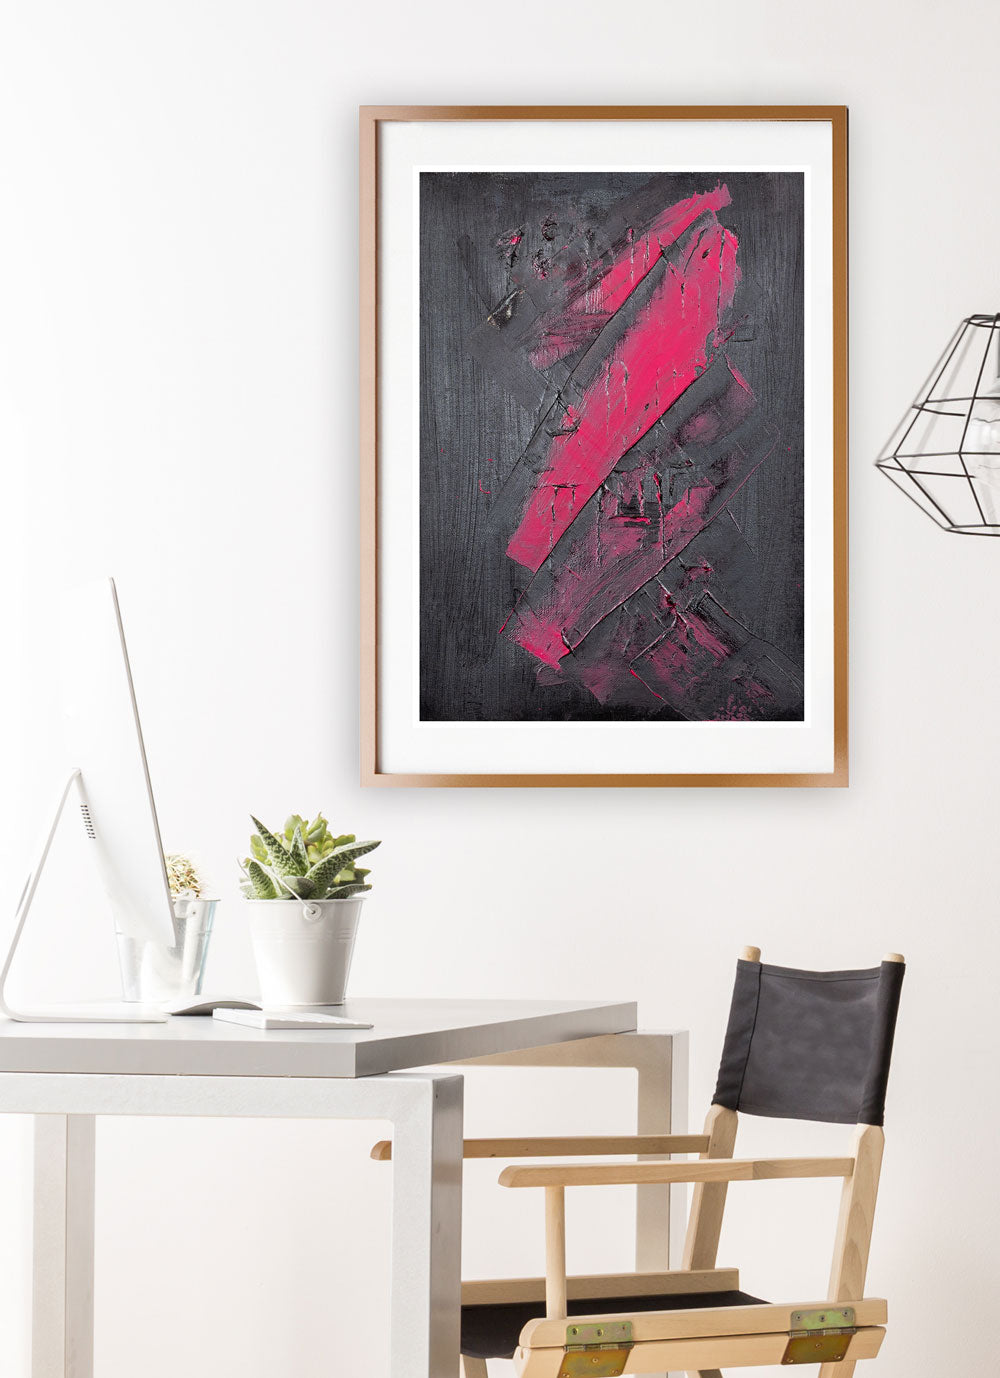 A Hint of Pink Painting Print in modern studio setting